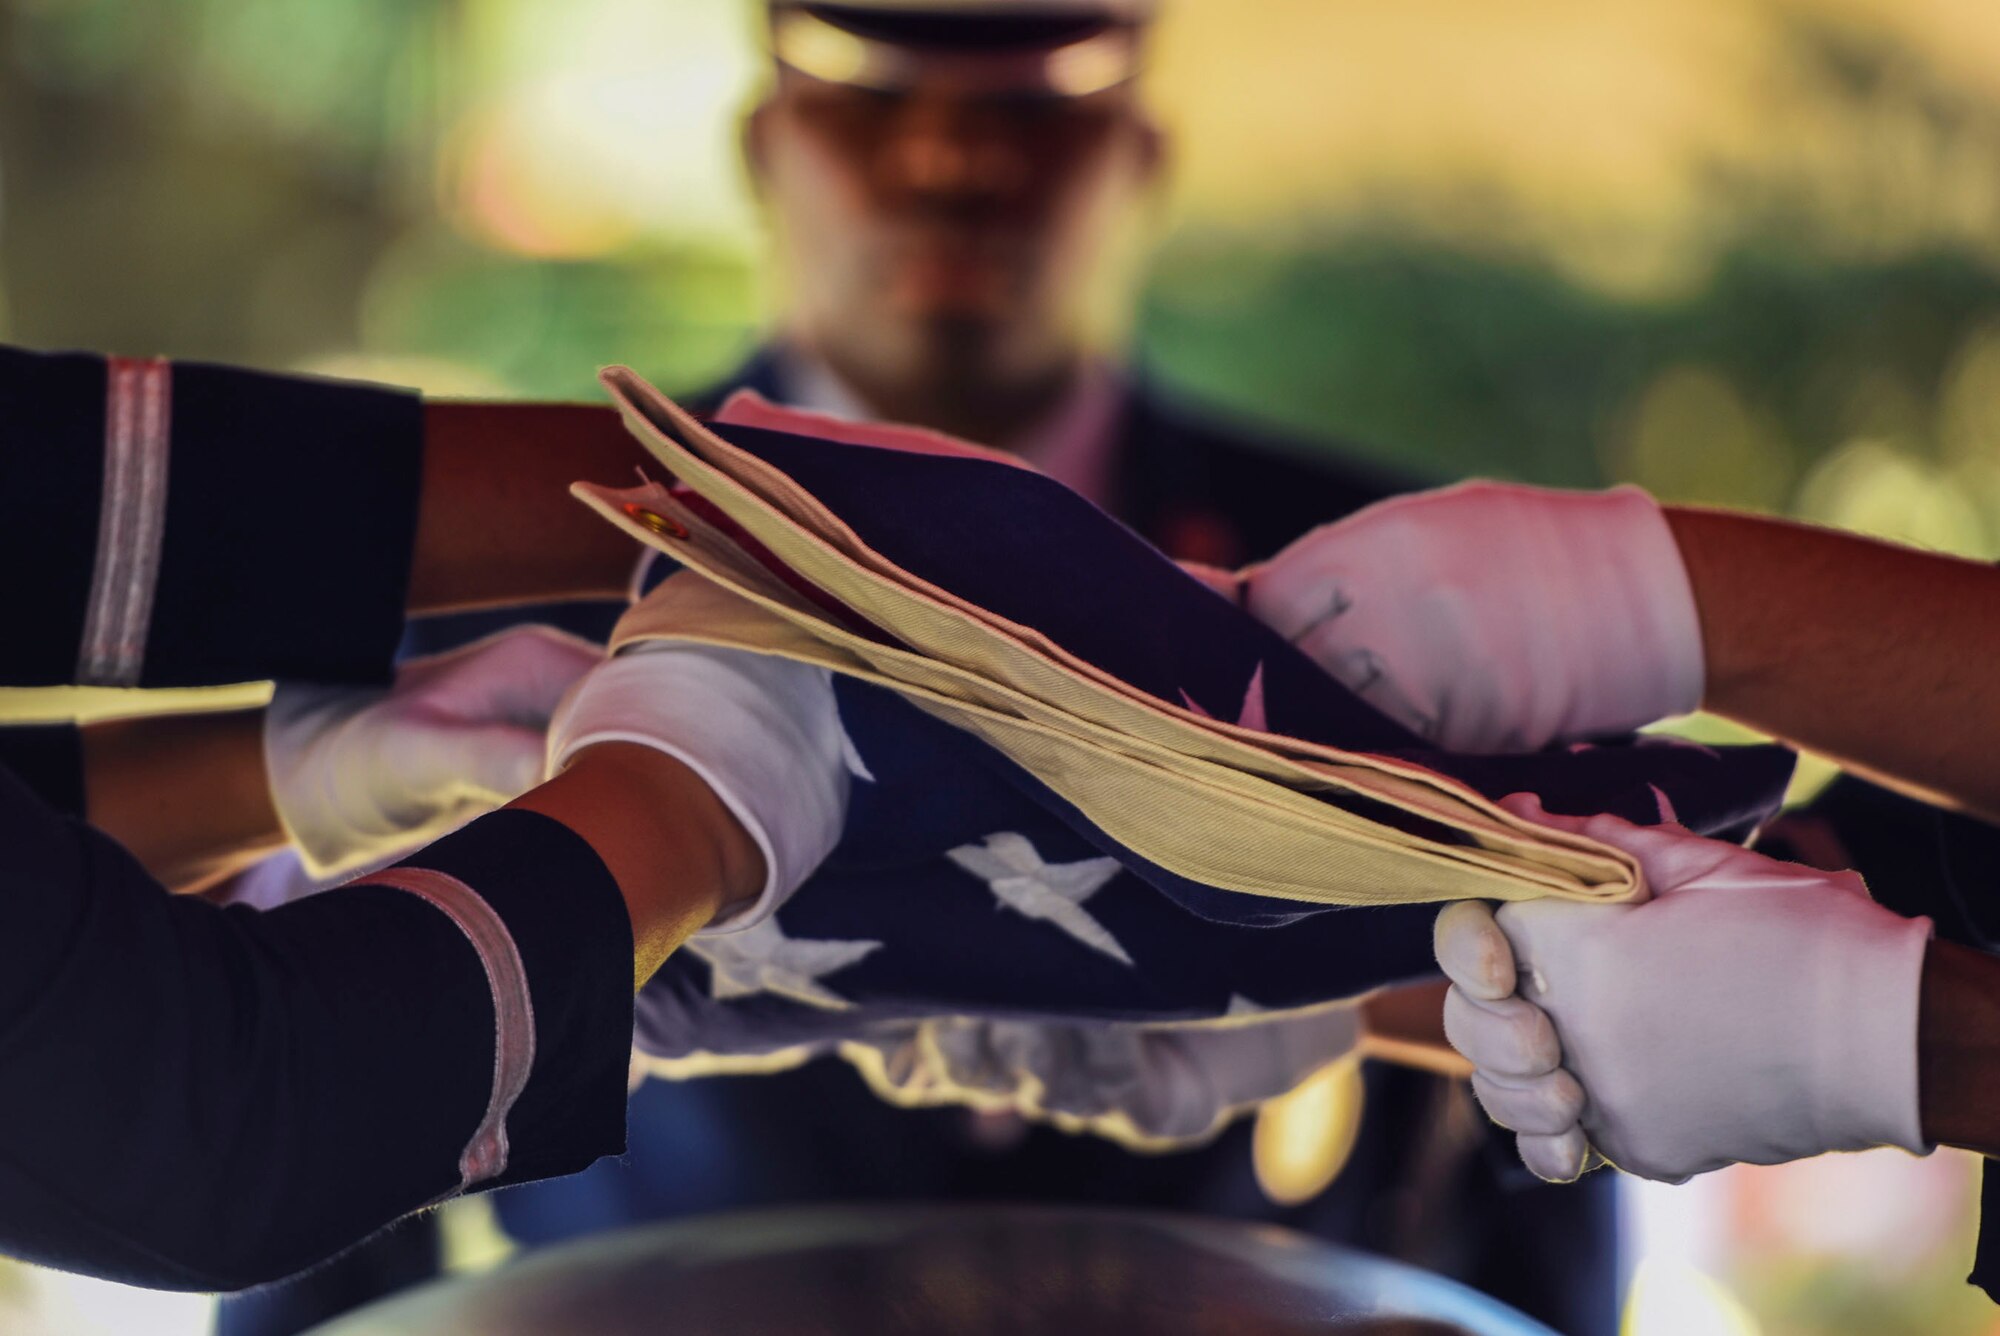 Members of the Moody Air Force Base Honor Guard fold a flag during a funeral in remembrance of Staff Sgt. Darryl Smith, 509th Medical Support Squadron laboratory technician, Whiteman AFB, Mo., Oct. 17, 2016, in Sparr, Fla. Moody’s honor guard performs congressionally mandated honors throughout 51 counties within Southern Georgia and Northern Florida. (U.S. Air Force photo by Airman 1st Class Greg Nash